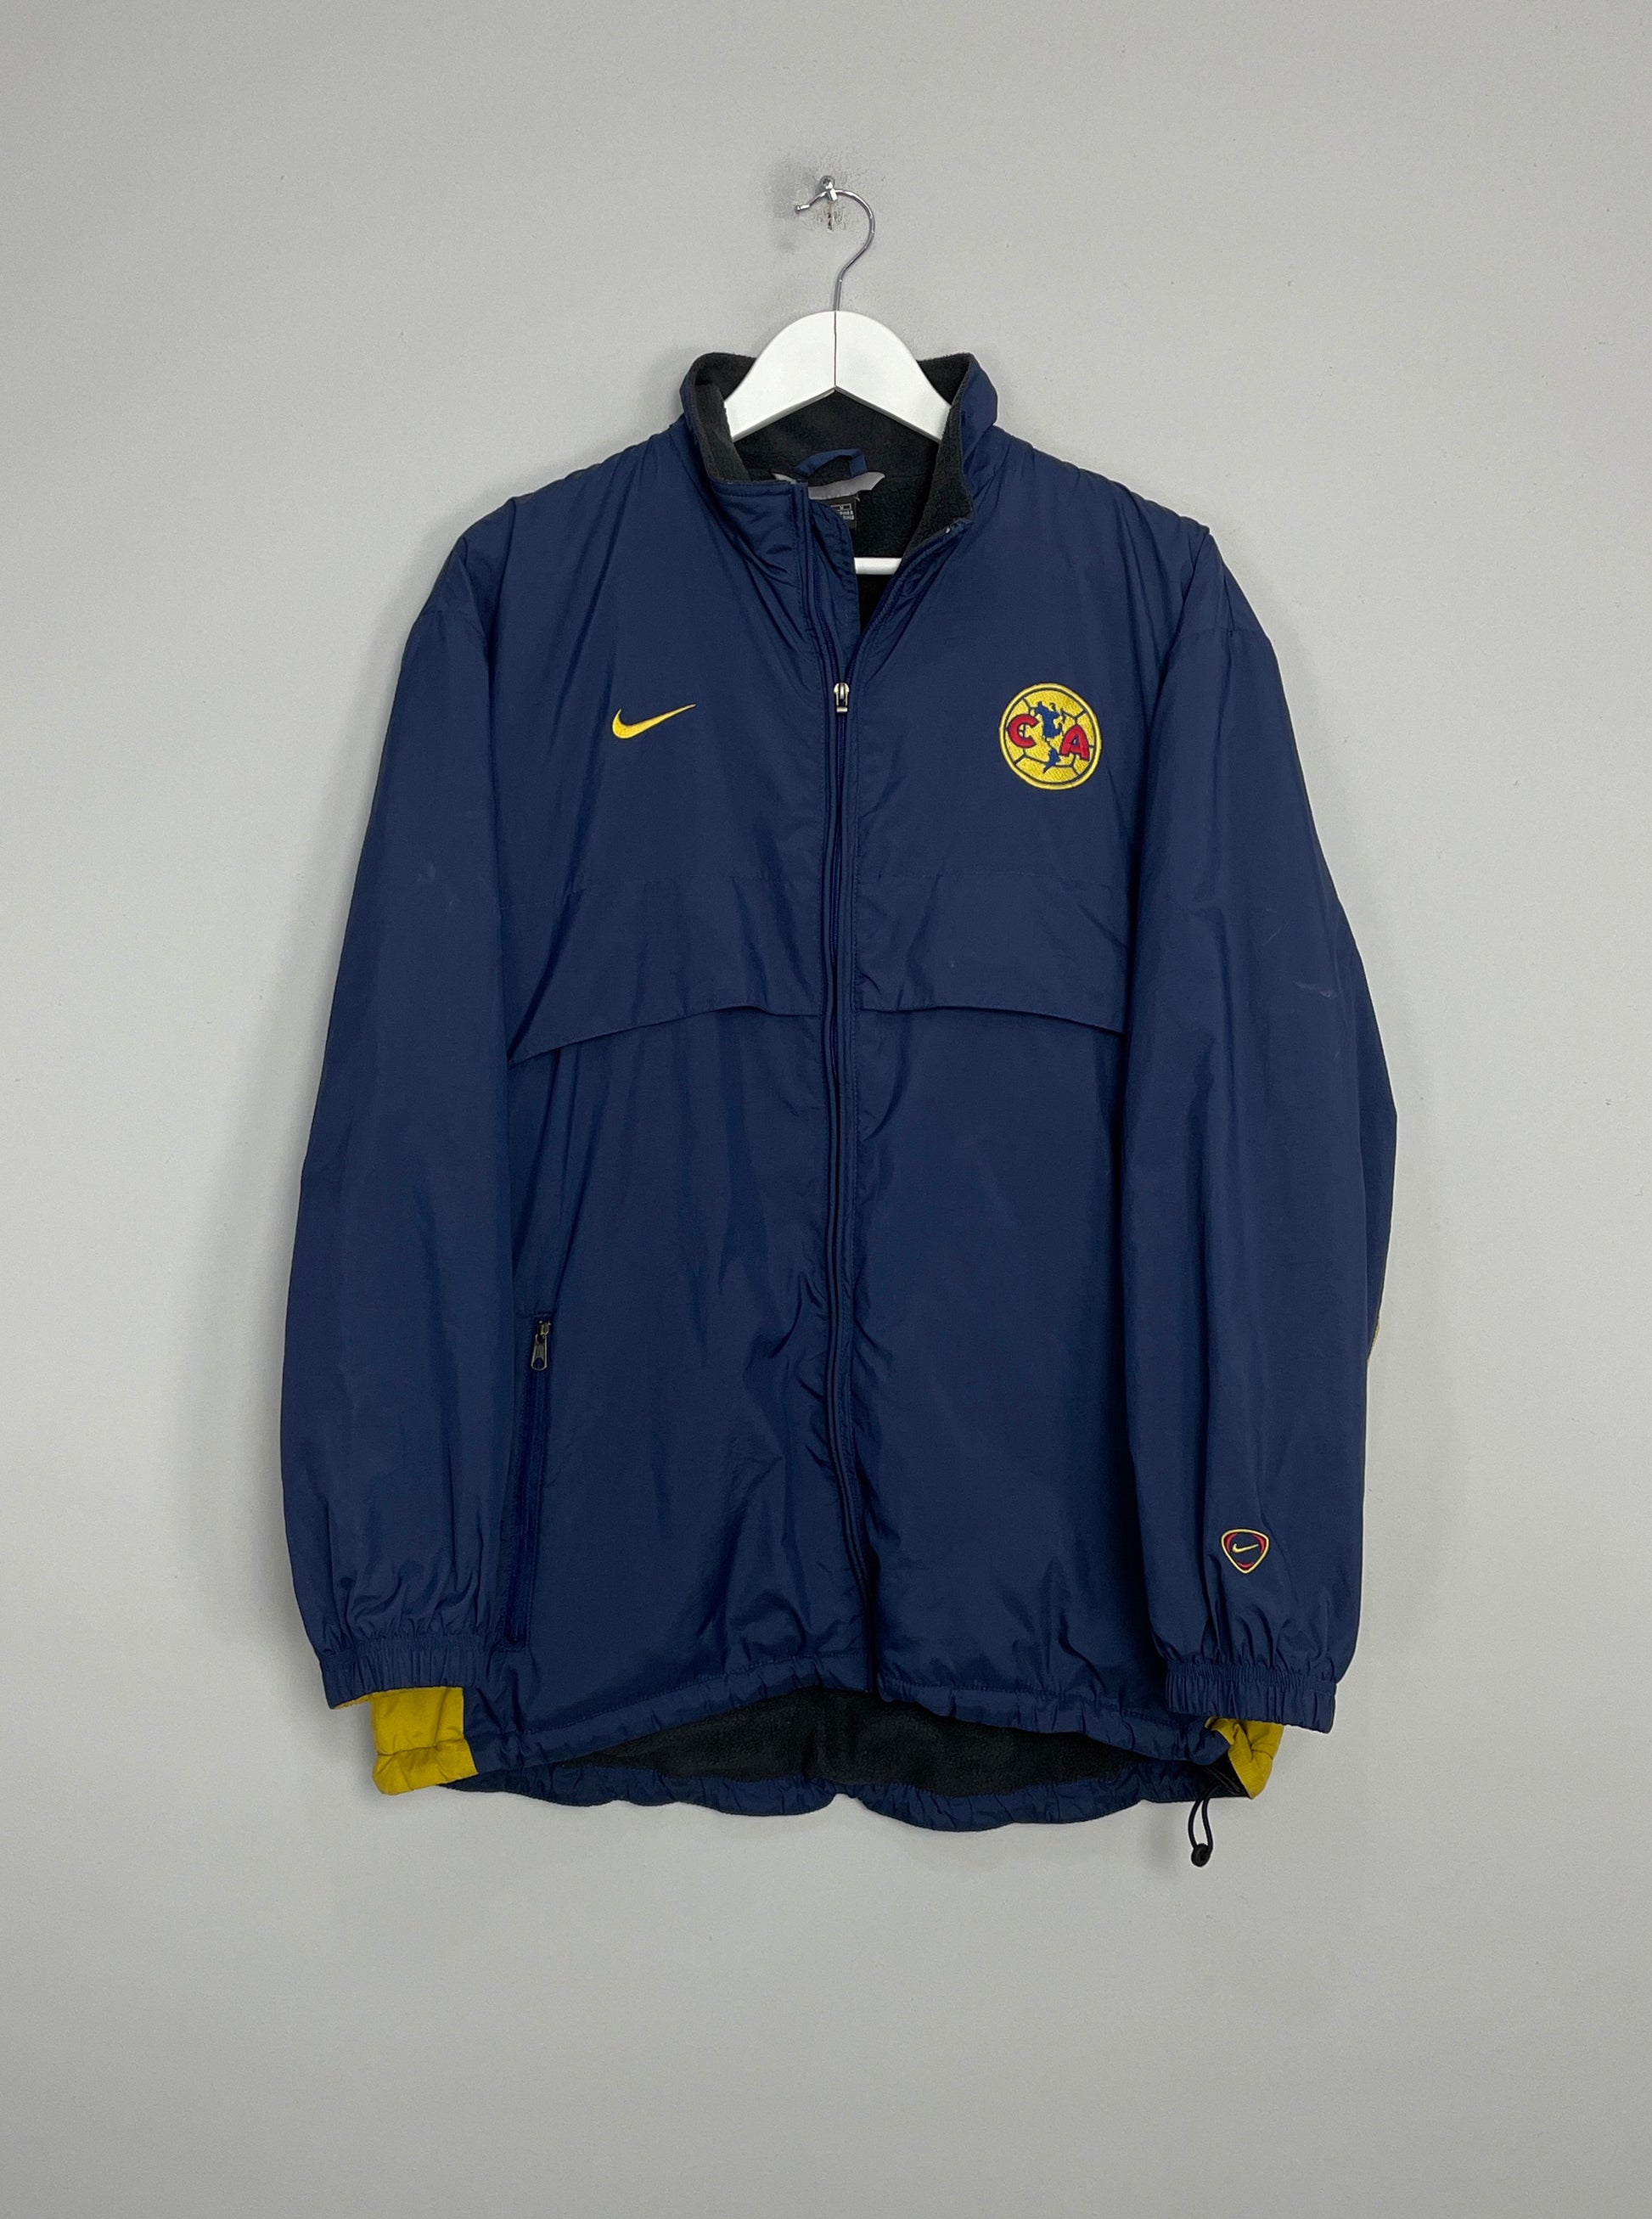 Image of the Club America jacket from the 2000/02 season